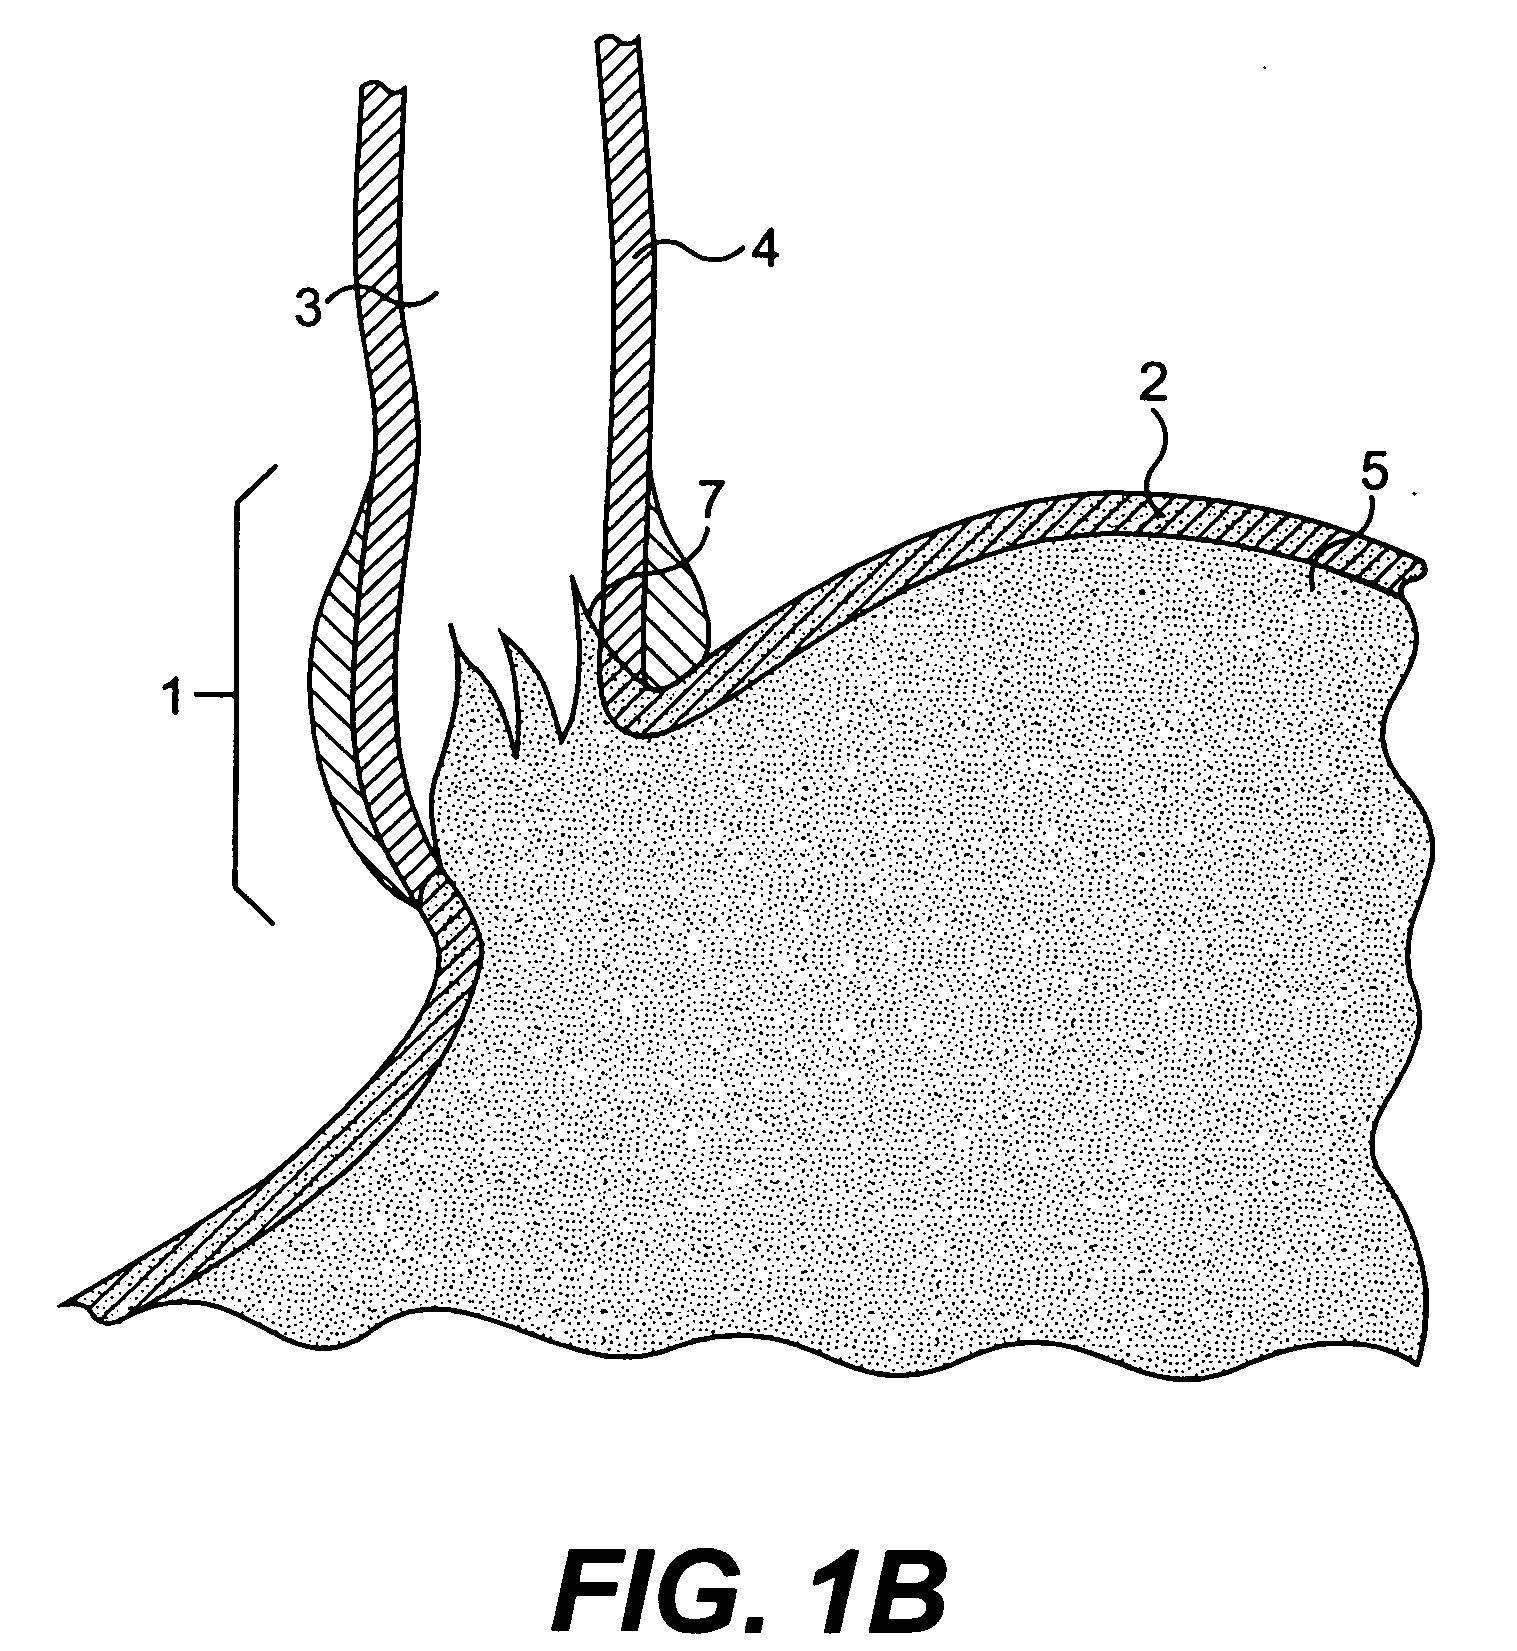 Tissue patches and related delivery systems and methods